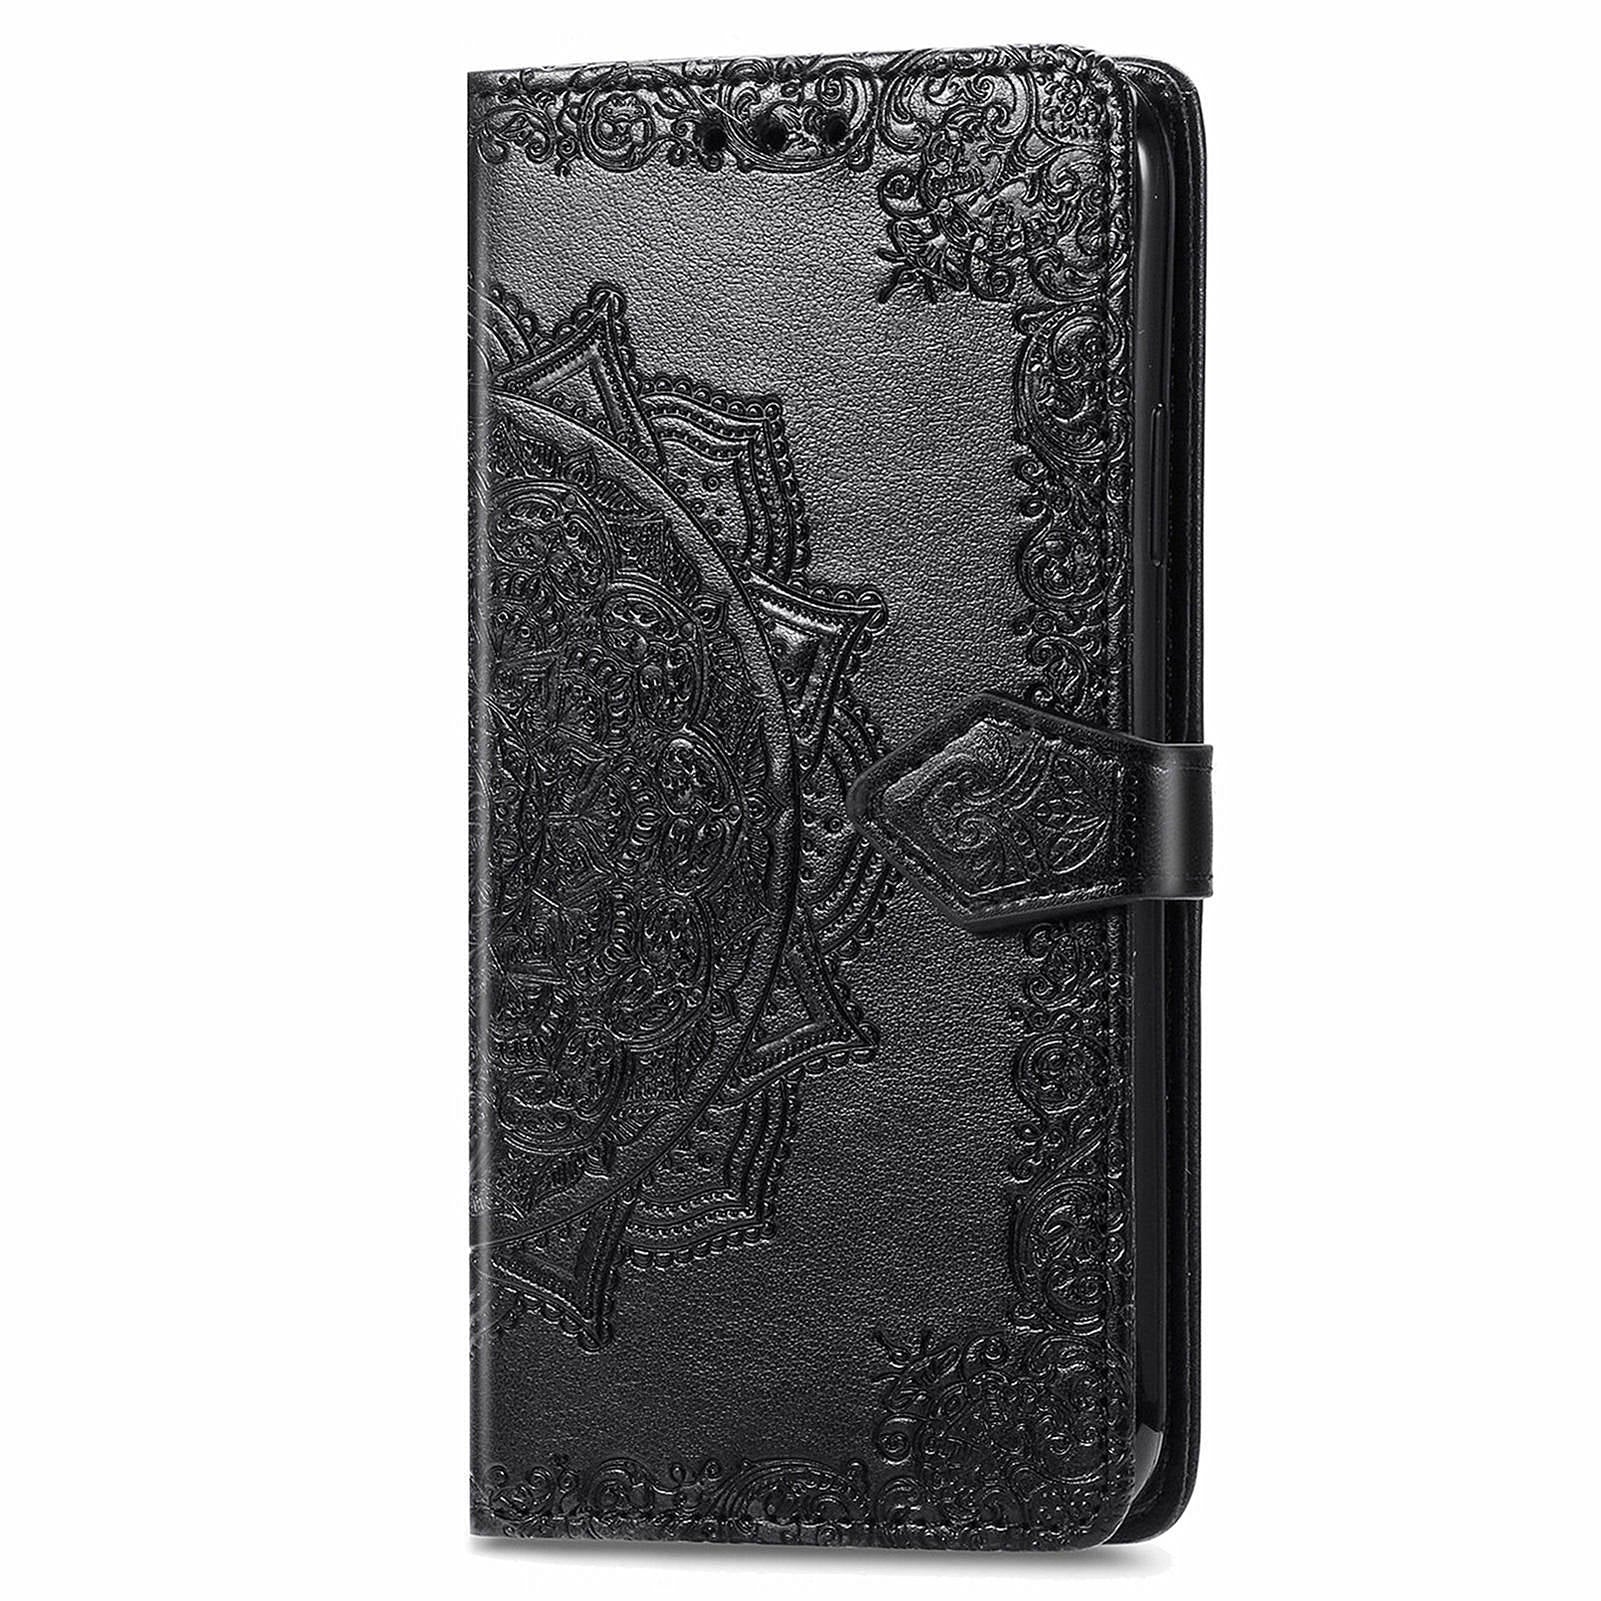 For Transsion Tecno Spark 20C Wallet Case Mandala Flower Leather Phone Cover - Black